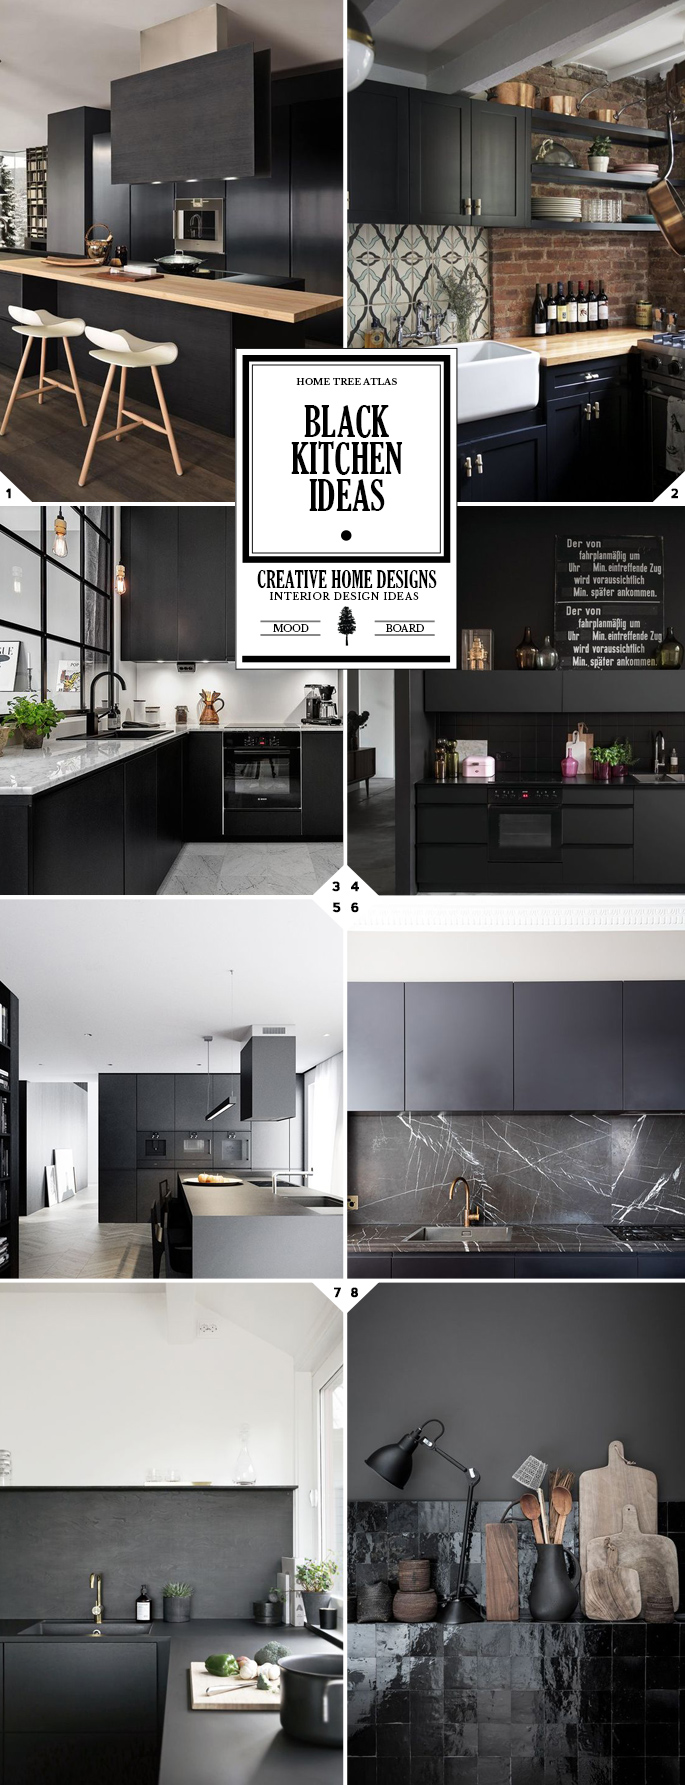 A Different Style: Black Kitchen Ideas and Designs